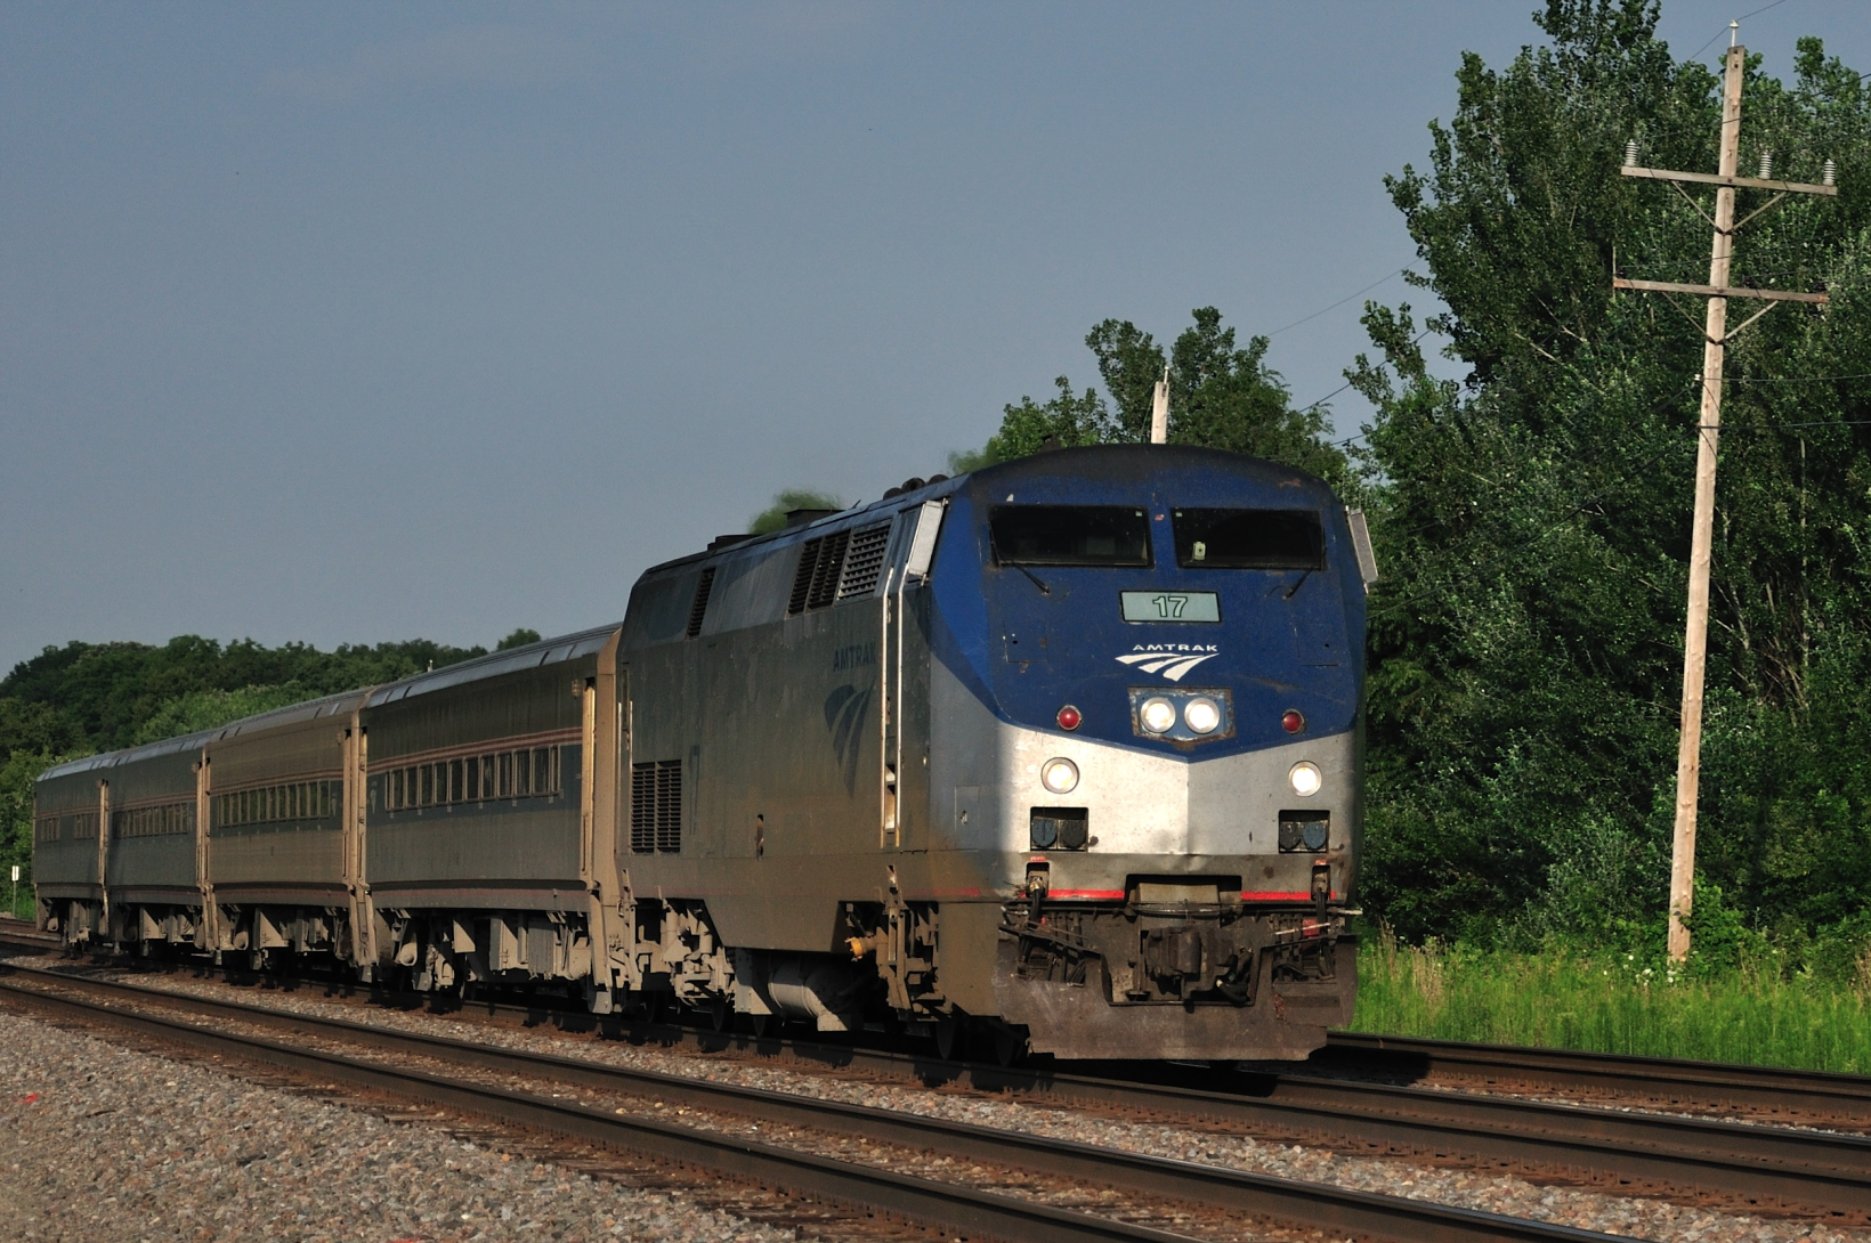 Breaking News: Amtrak Launches A High-Speed Project Turned Deadly